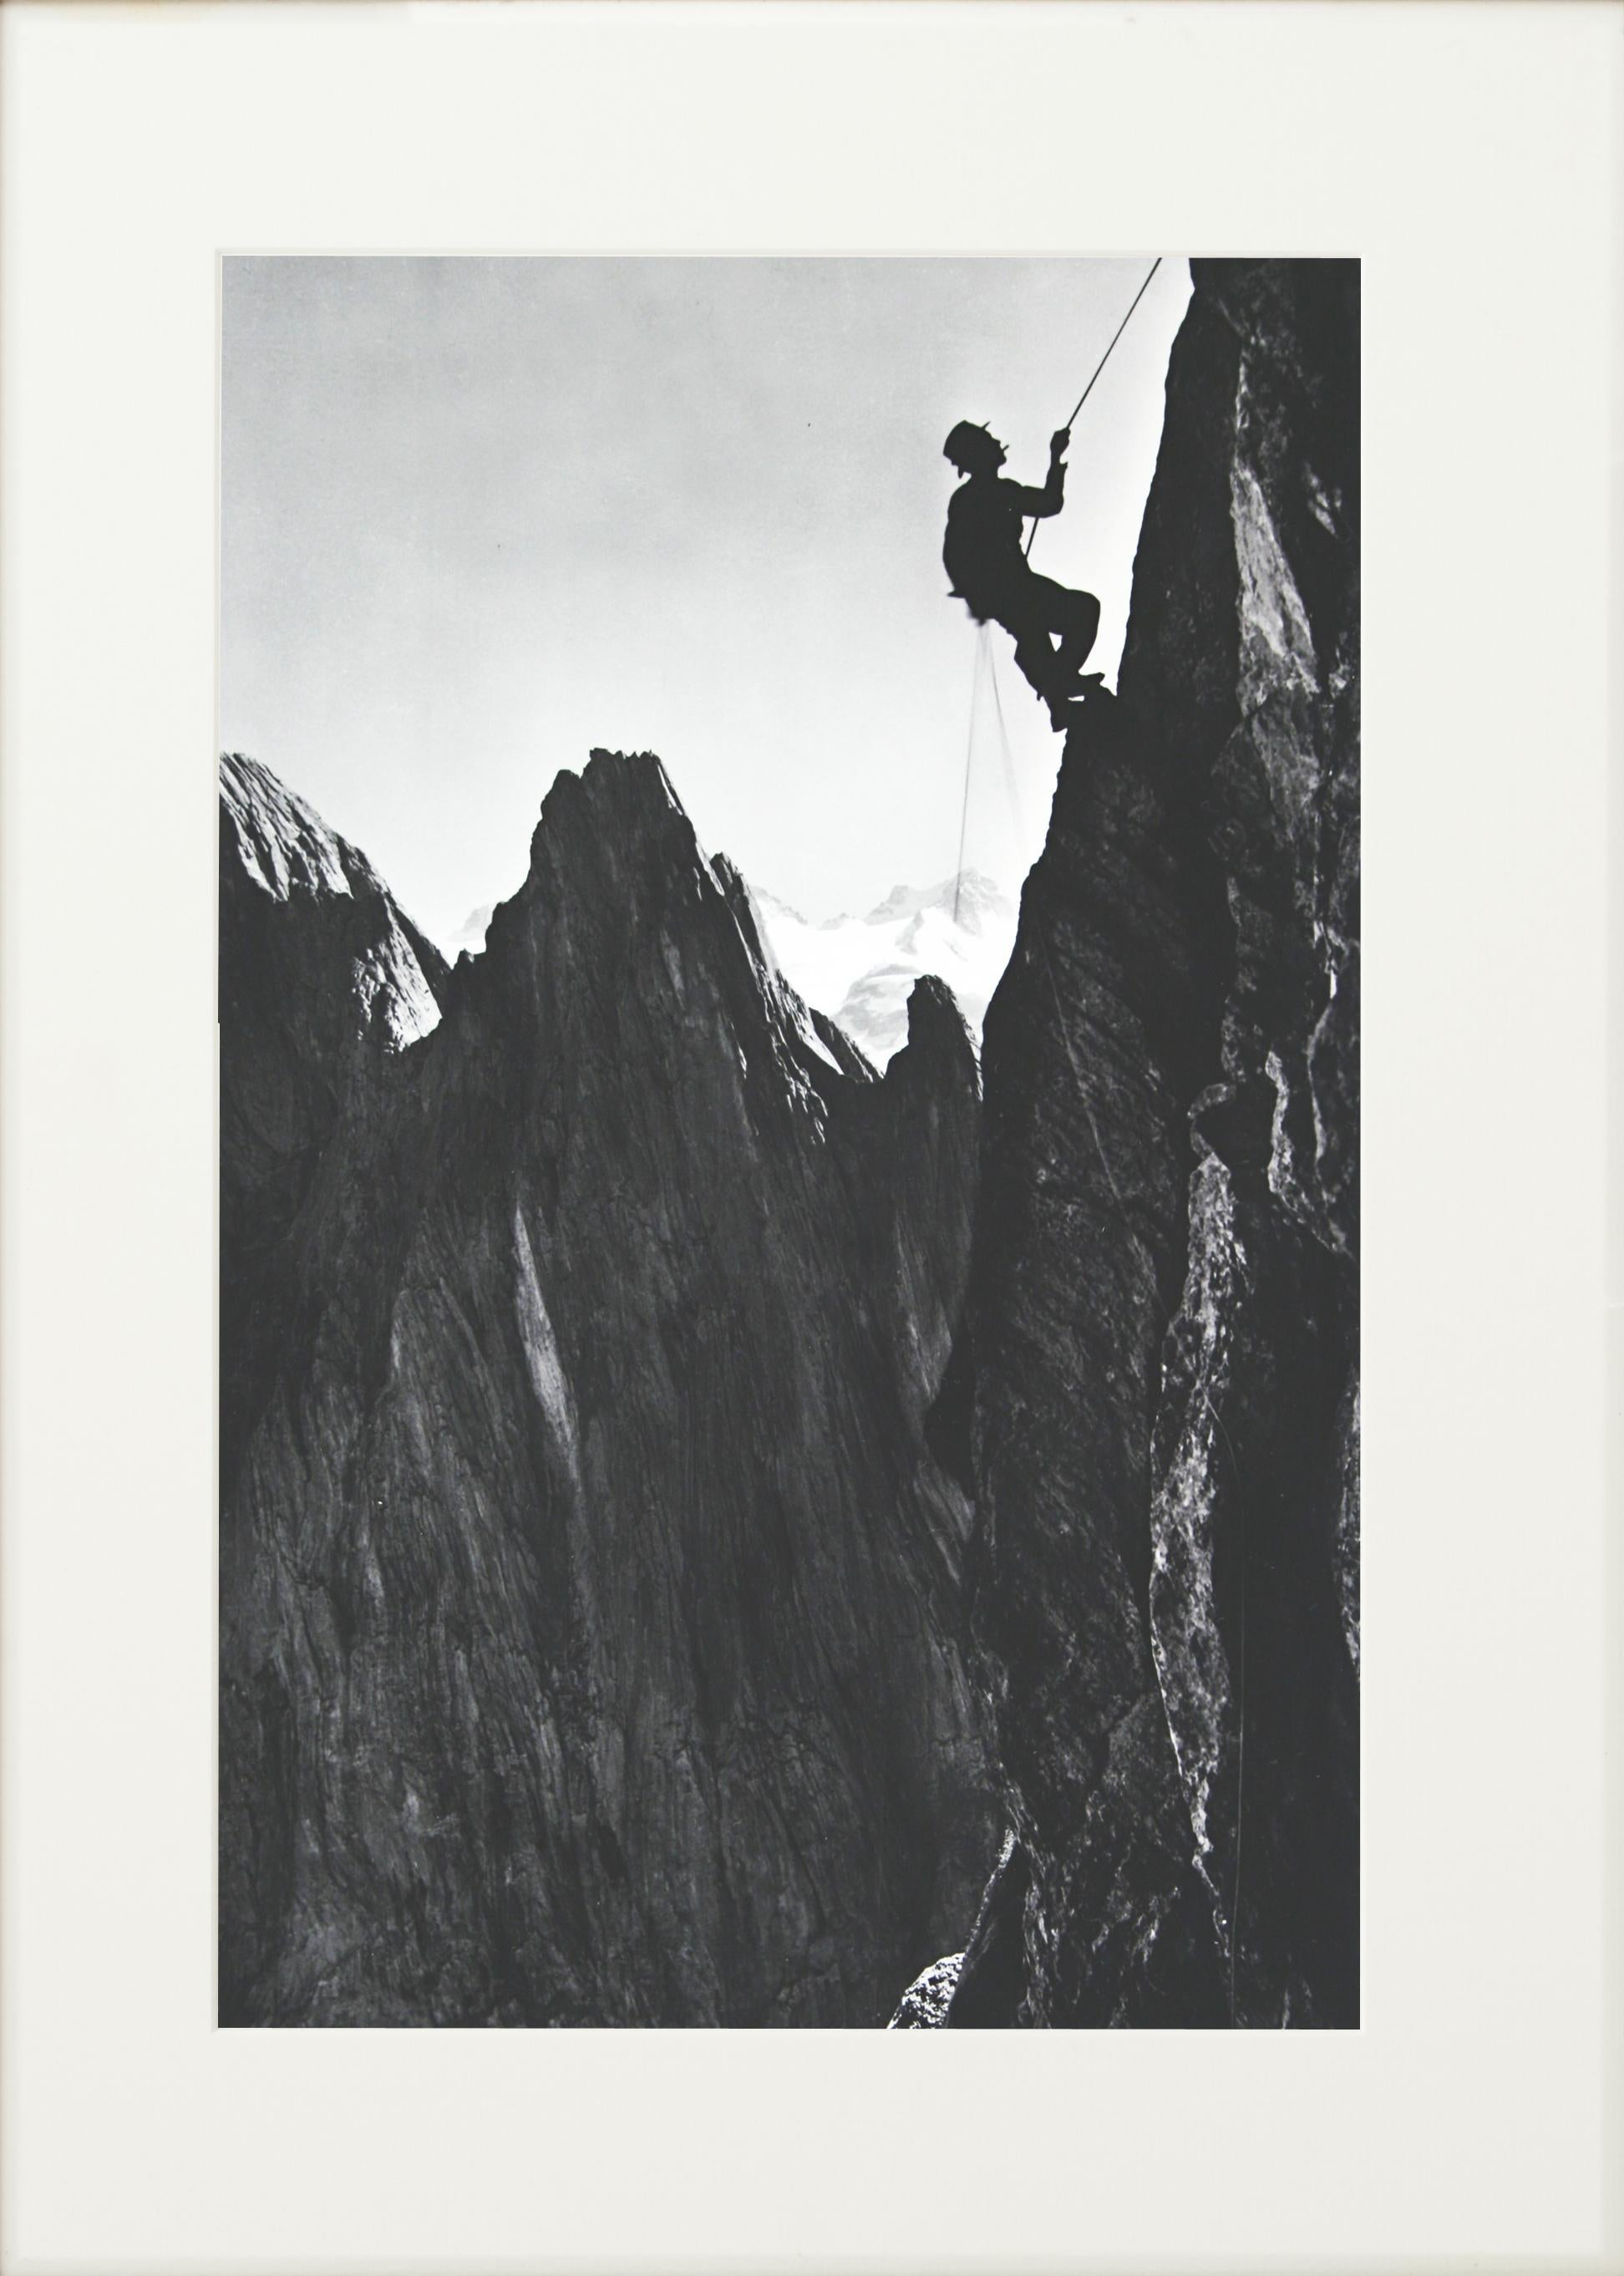 Sporting Art Alpine Mountaineering Photograph, 'CLIMBER' Taken from 1930s Original For Sale